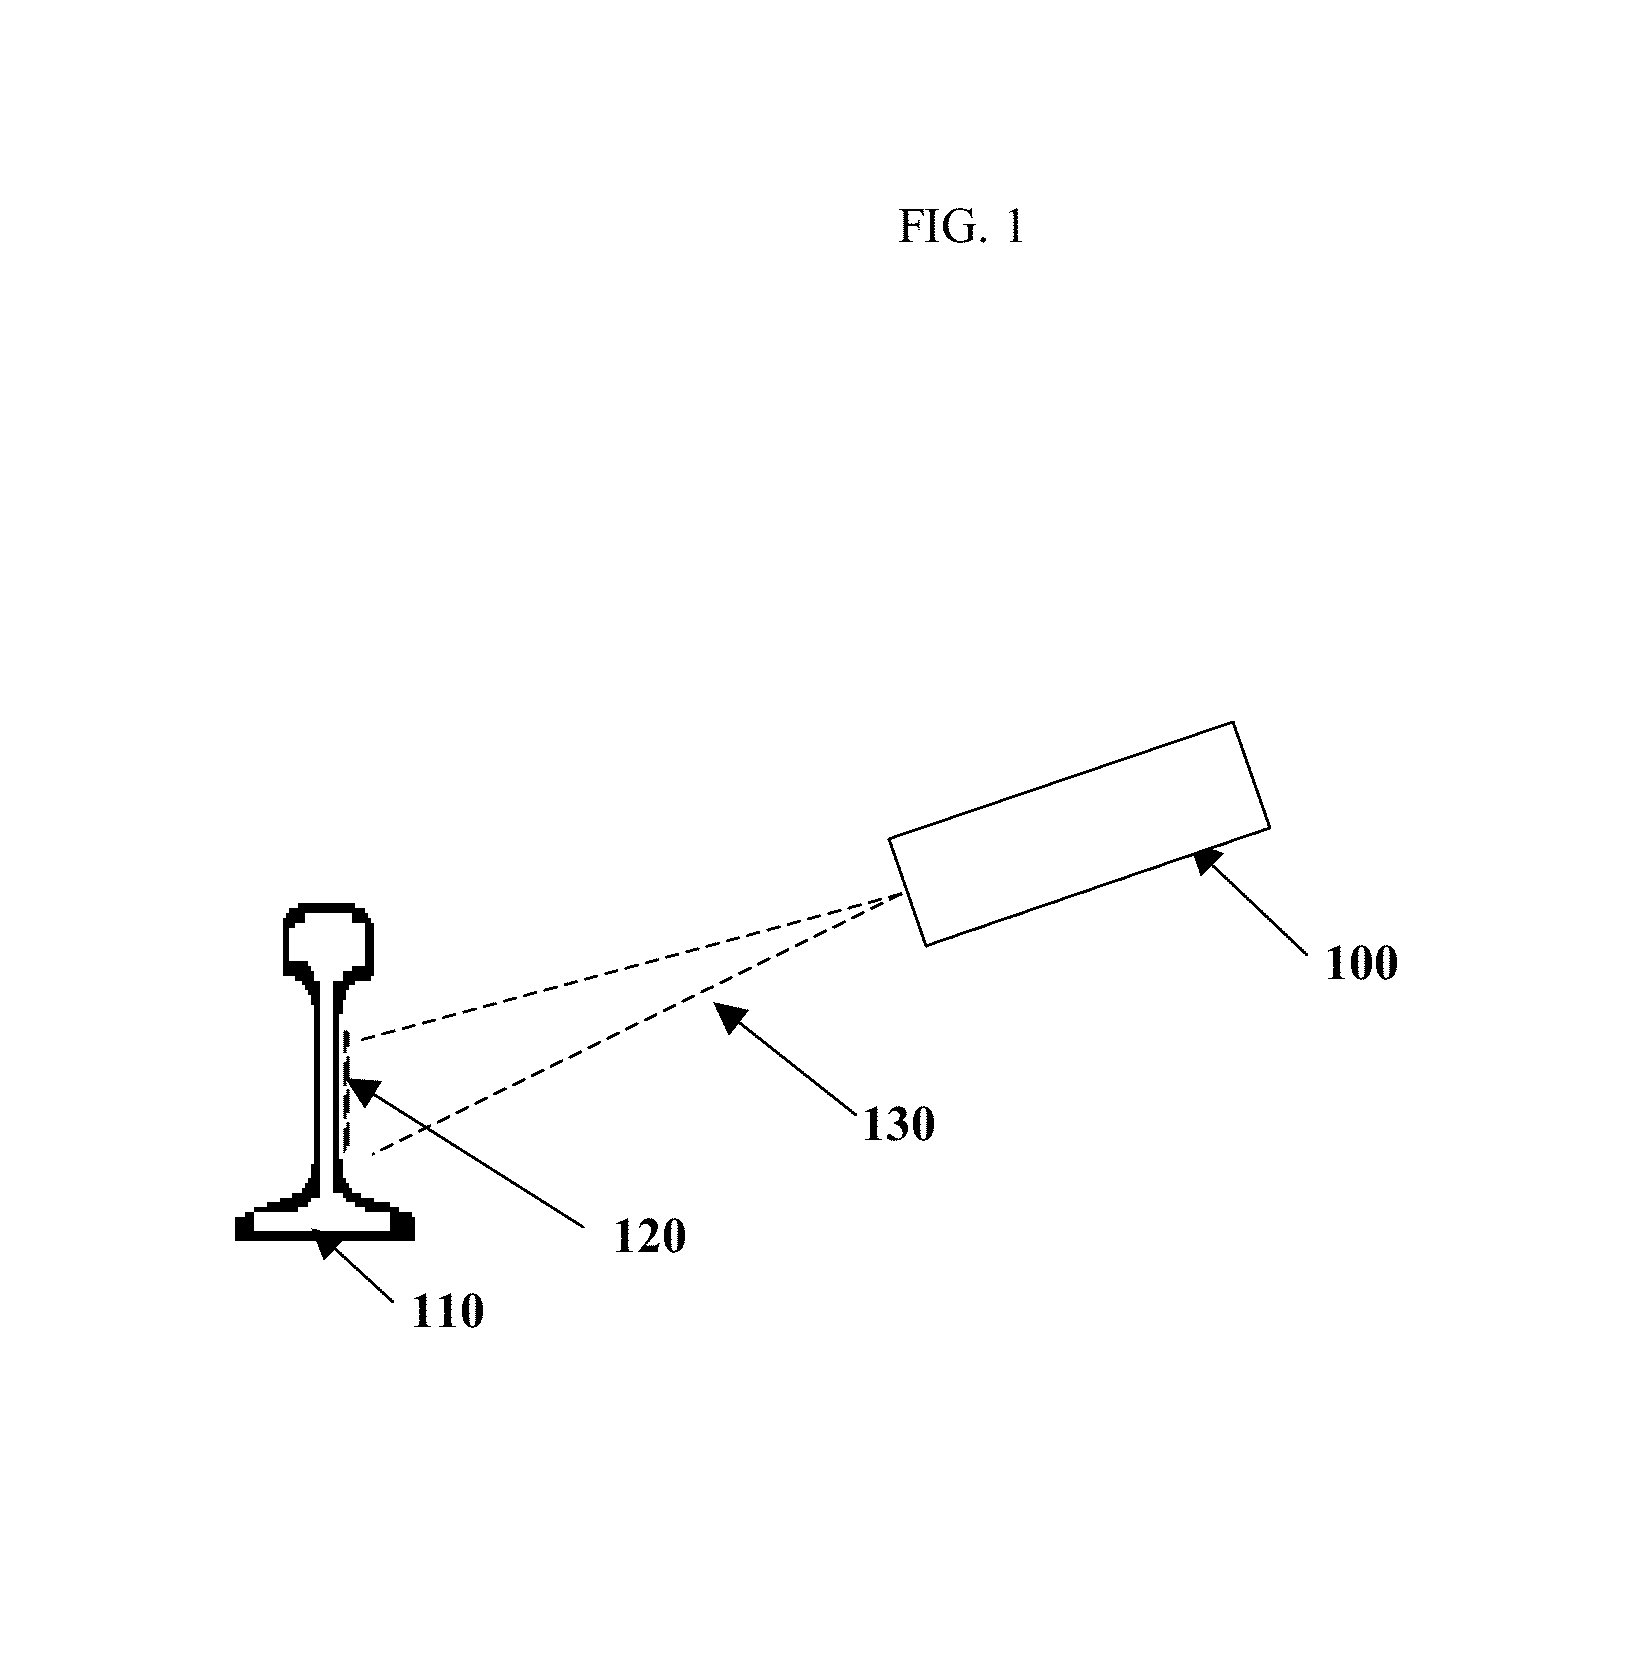 Method and Apparatus for Measuring Rail Surface Temperature